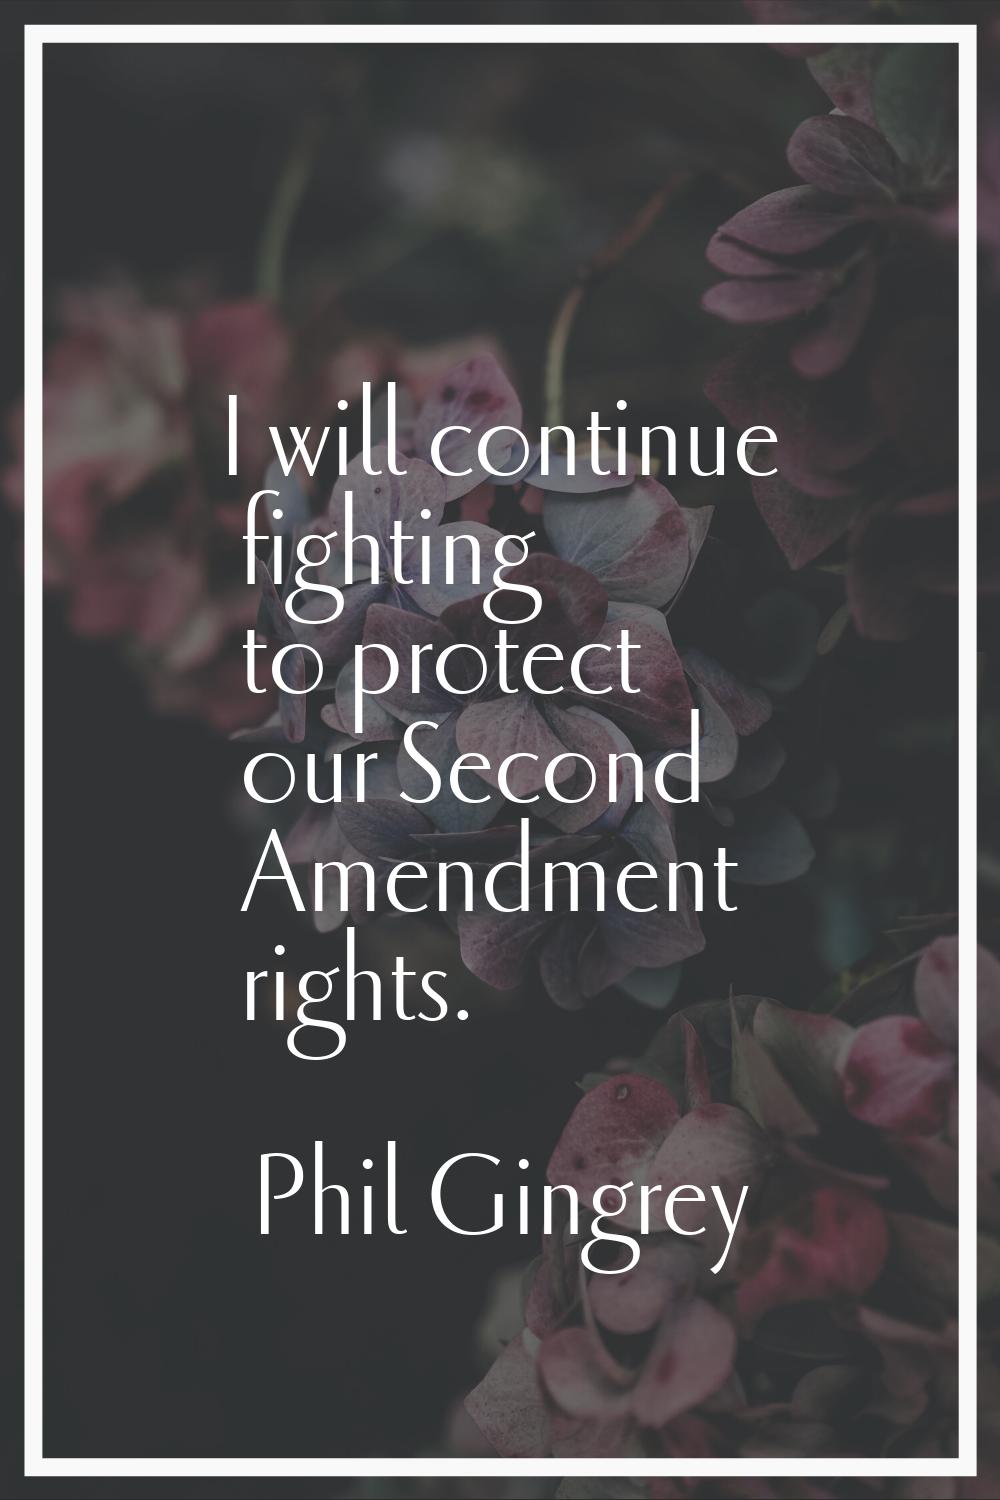 I will continue fighting to protect our Second Amendment rights.